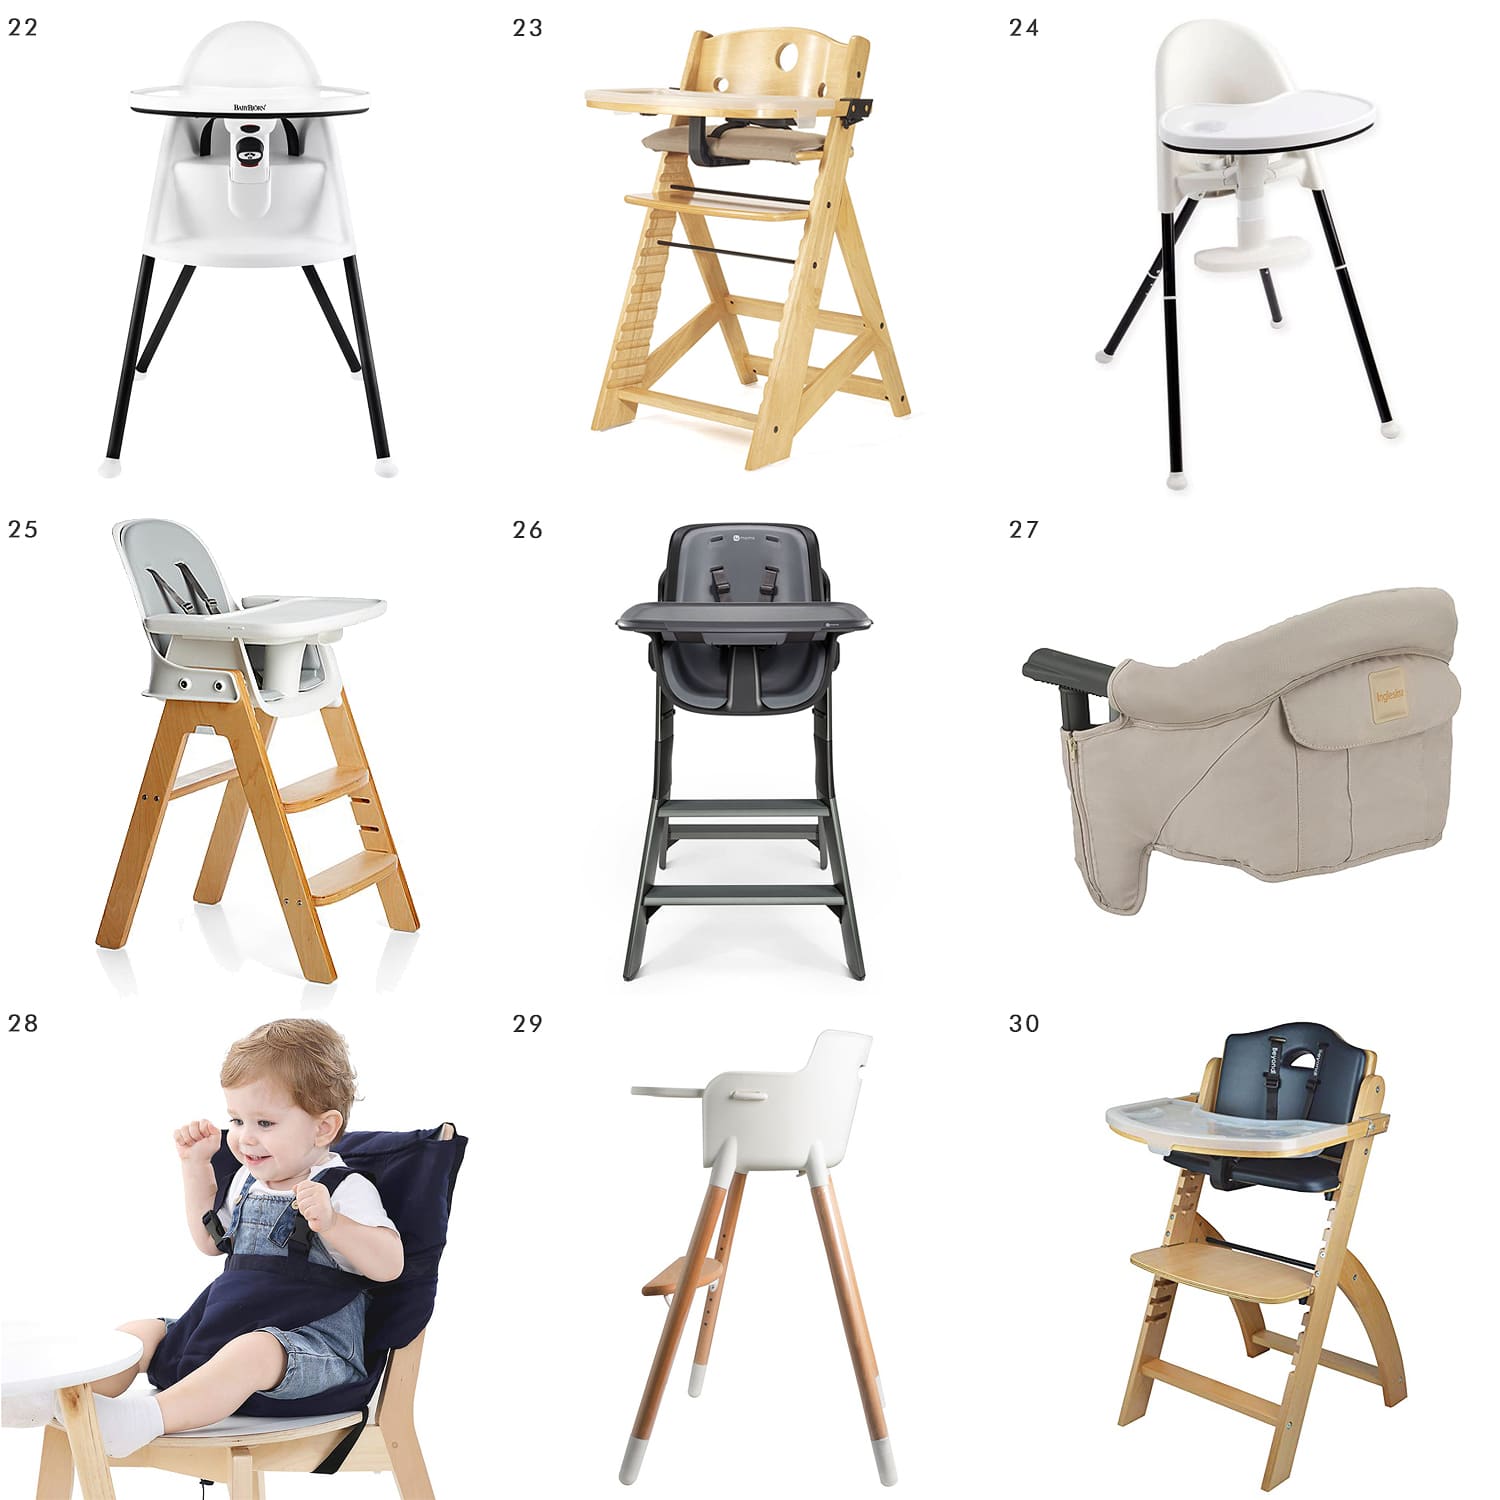 30 Tabletop Items for Kids (That You'll Like, Too) | a round up of attractive toddler friendly tabletop items and high chairs | via Yellow Brick Home